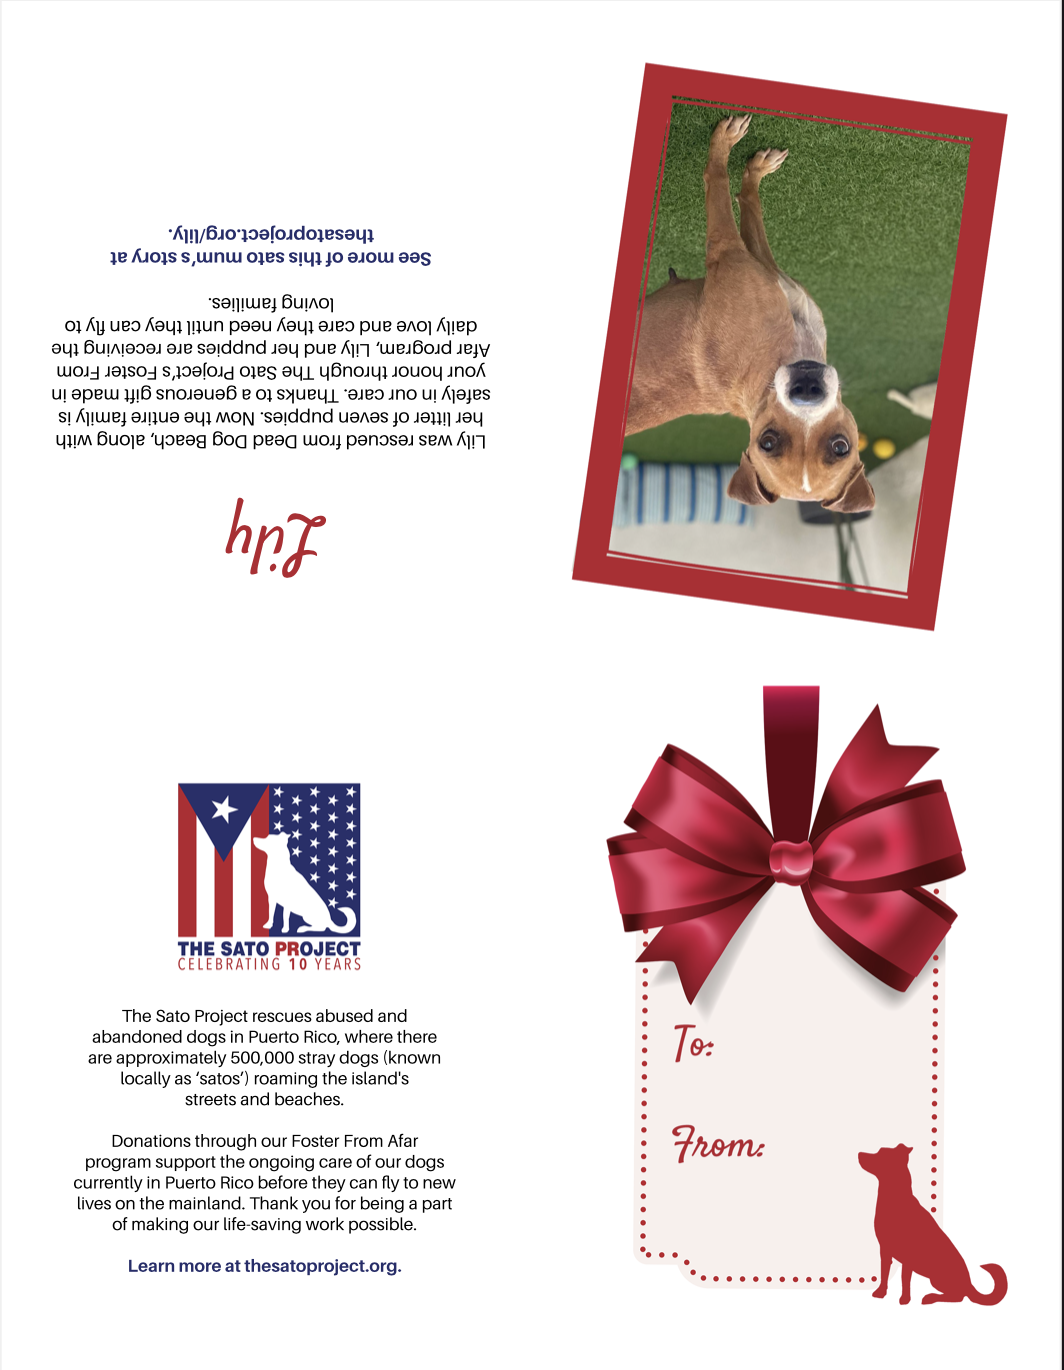 You'll also receive this printable card to give your donation as a gift.